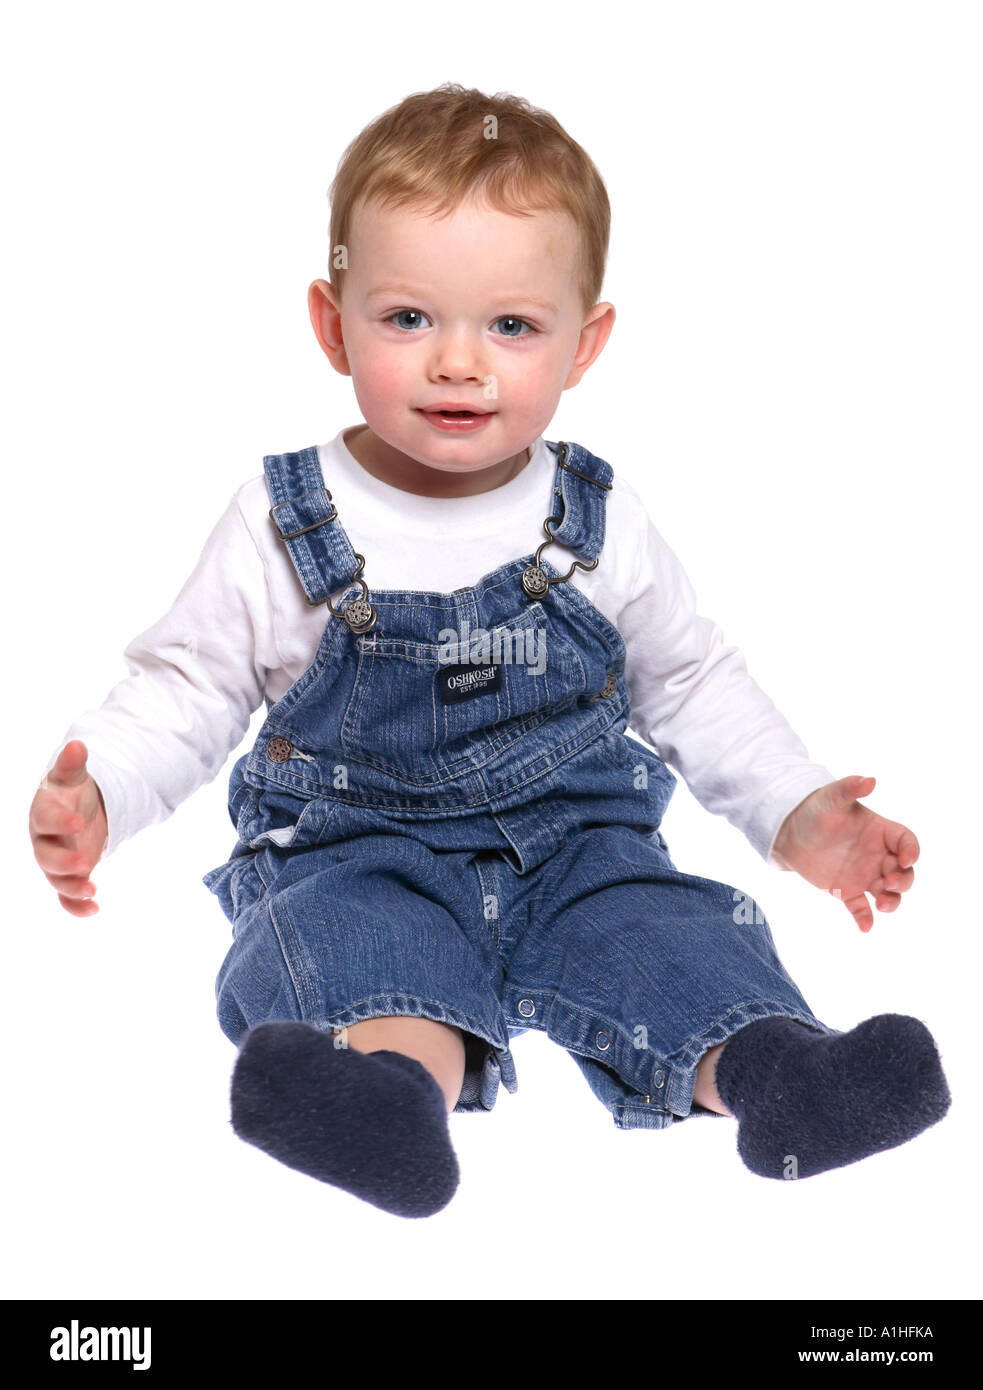 18 month old toddler wearing overalls Stock Photo